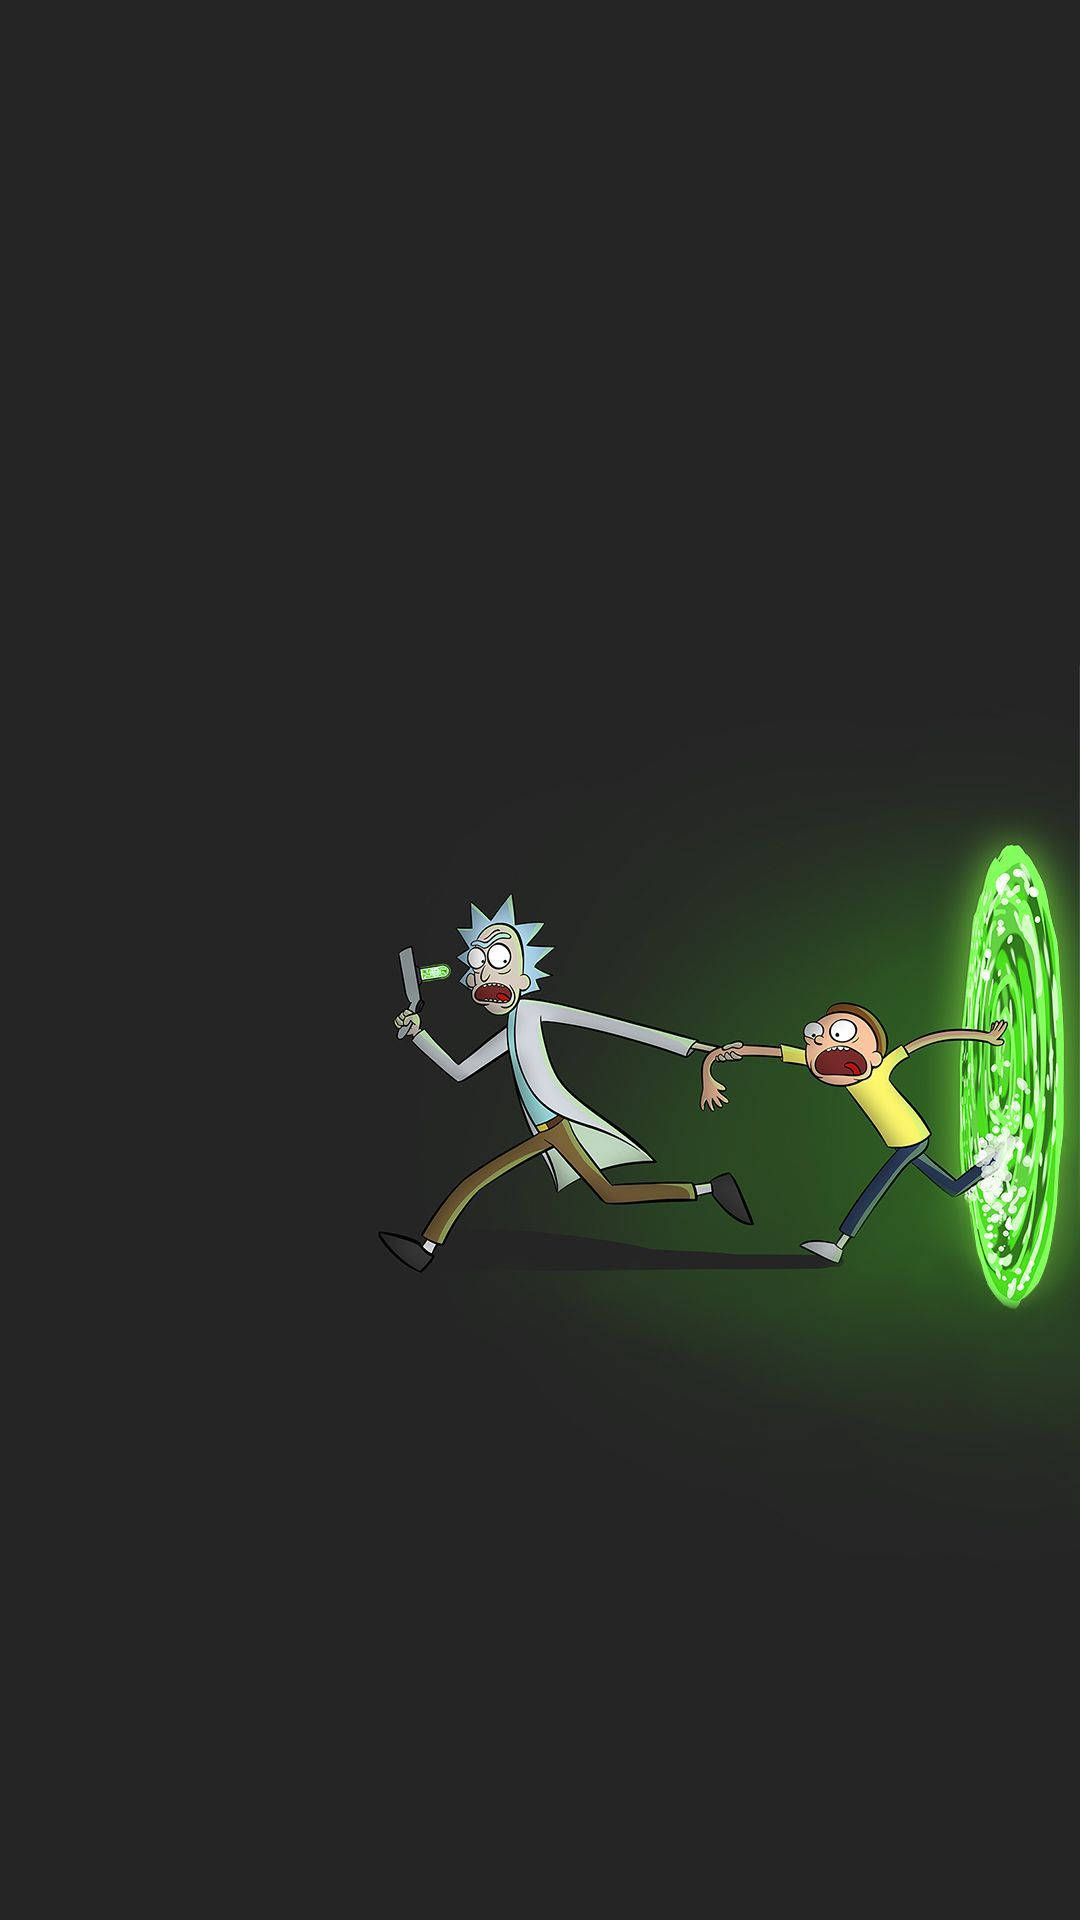 Rick and Morty Running Away From Portal Wallpaper